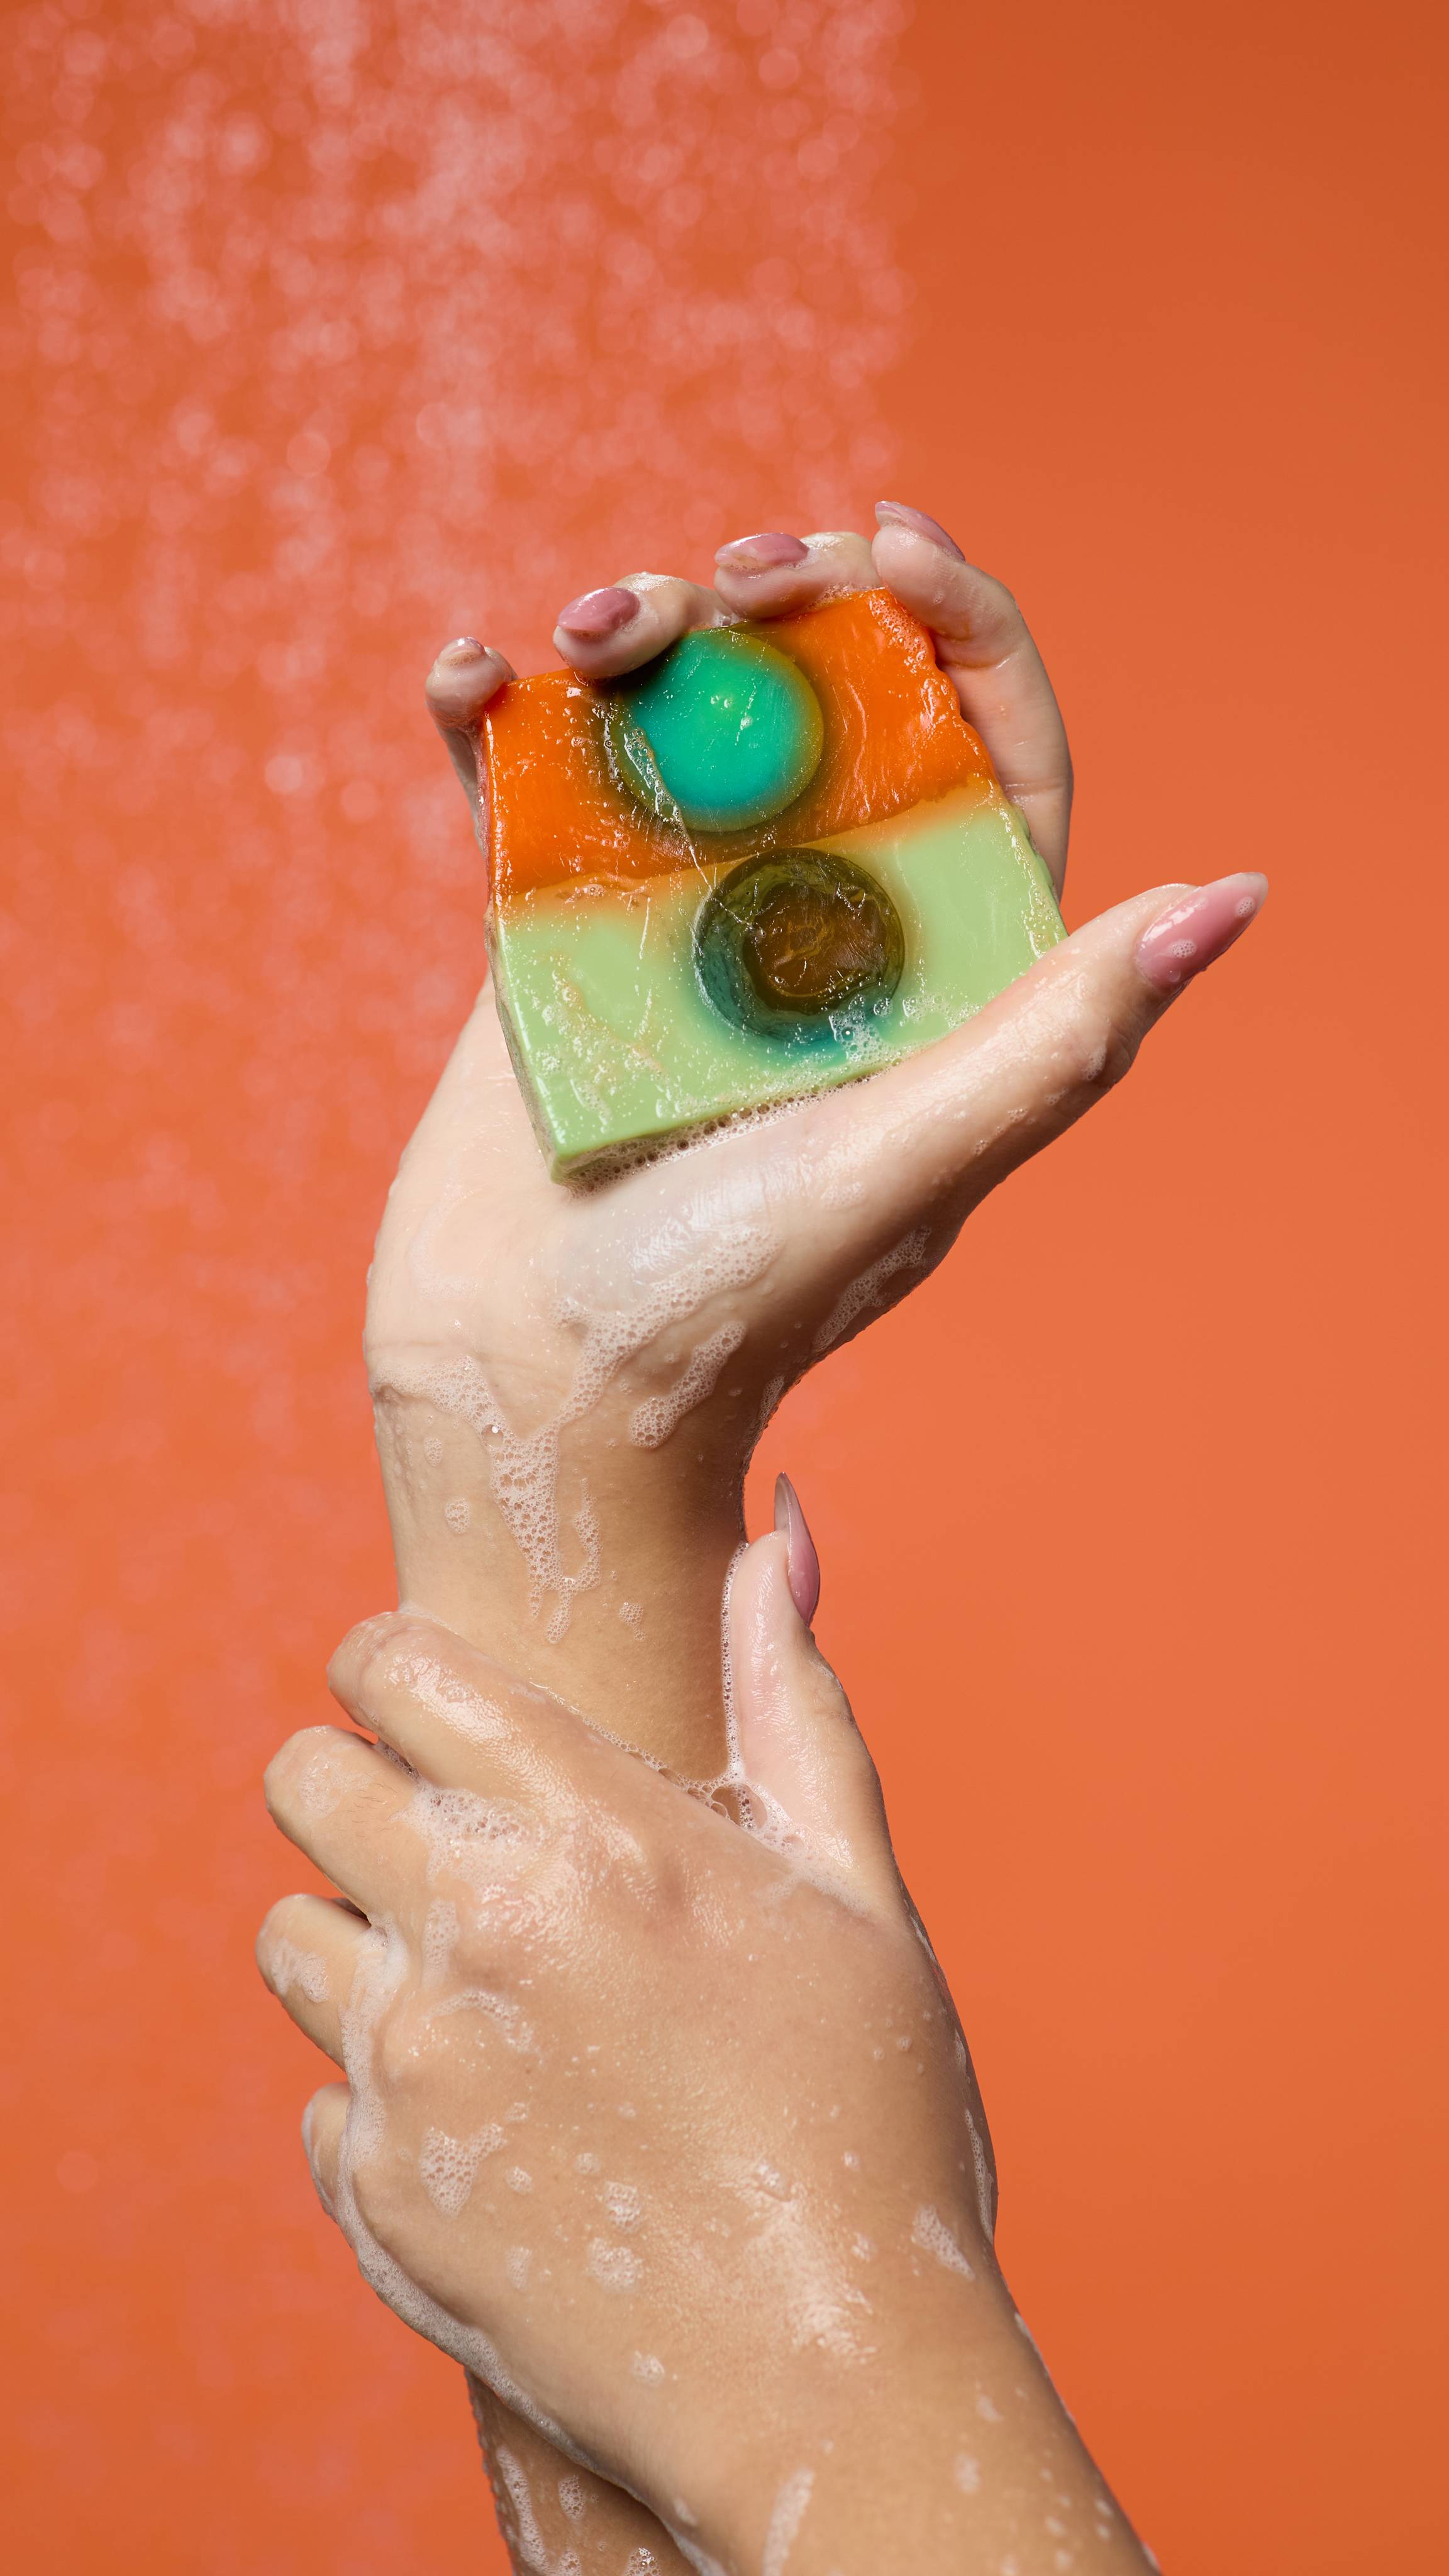 The image shows a blurred background with running shower water. The model's forearms can be seen as one hand holds the Alban Elfed soap, gently laced in suds. 